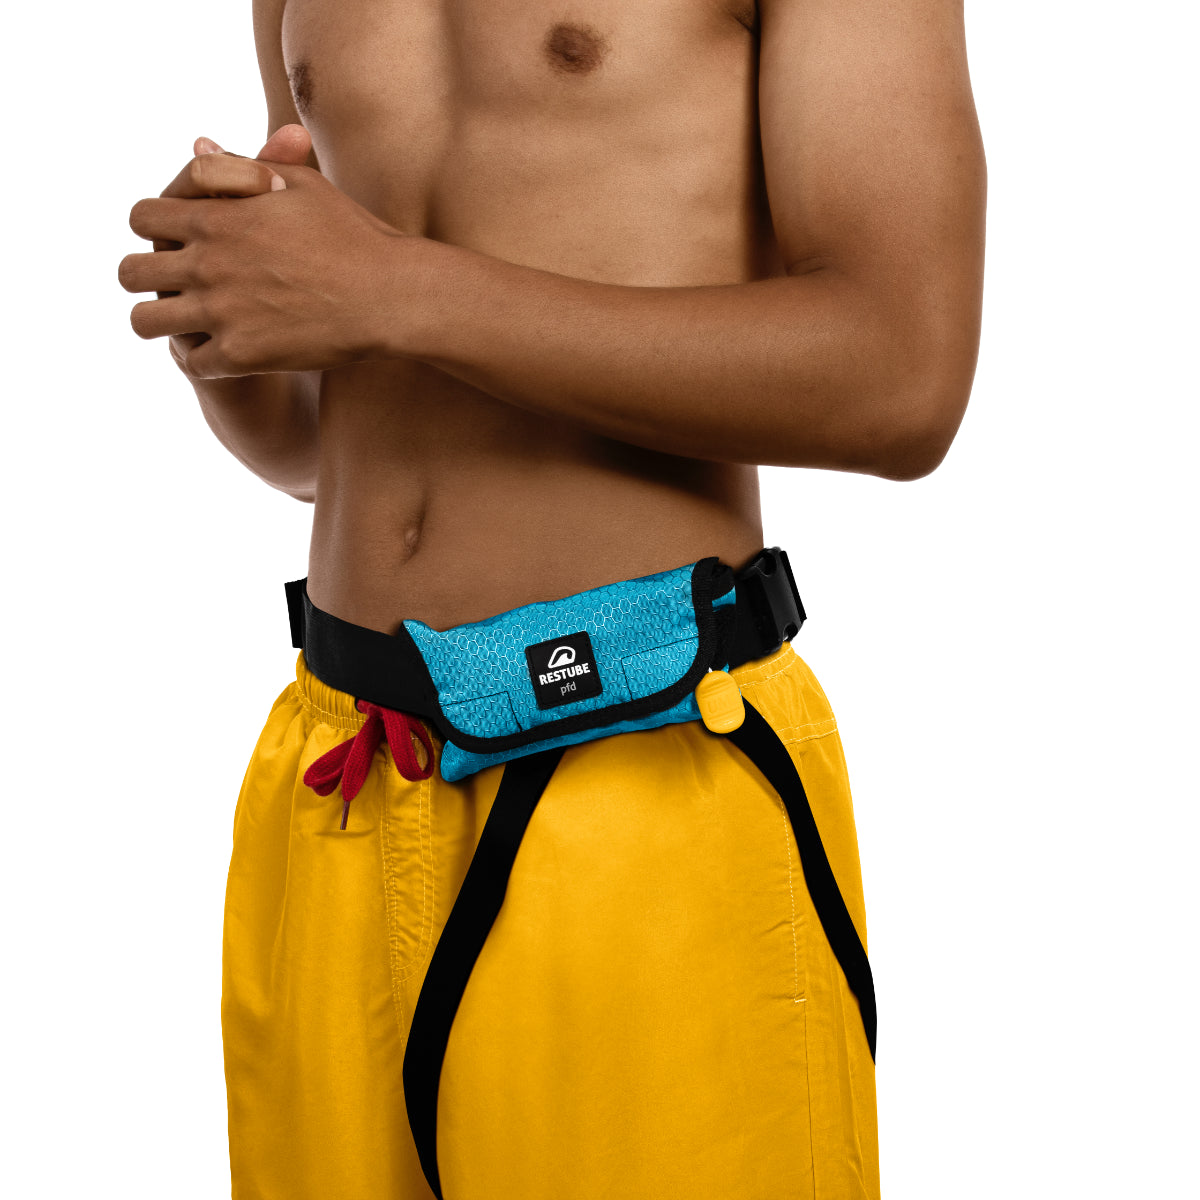 PFD by Restube - with leg strap, male model